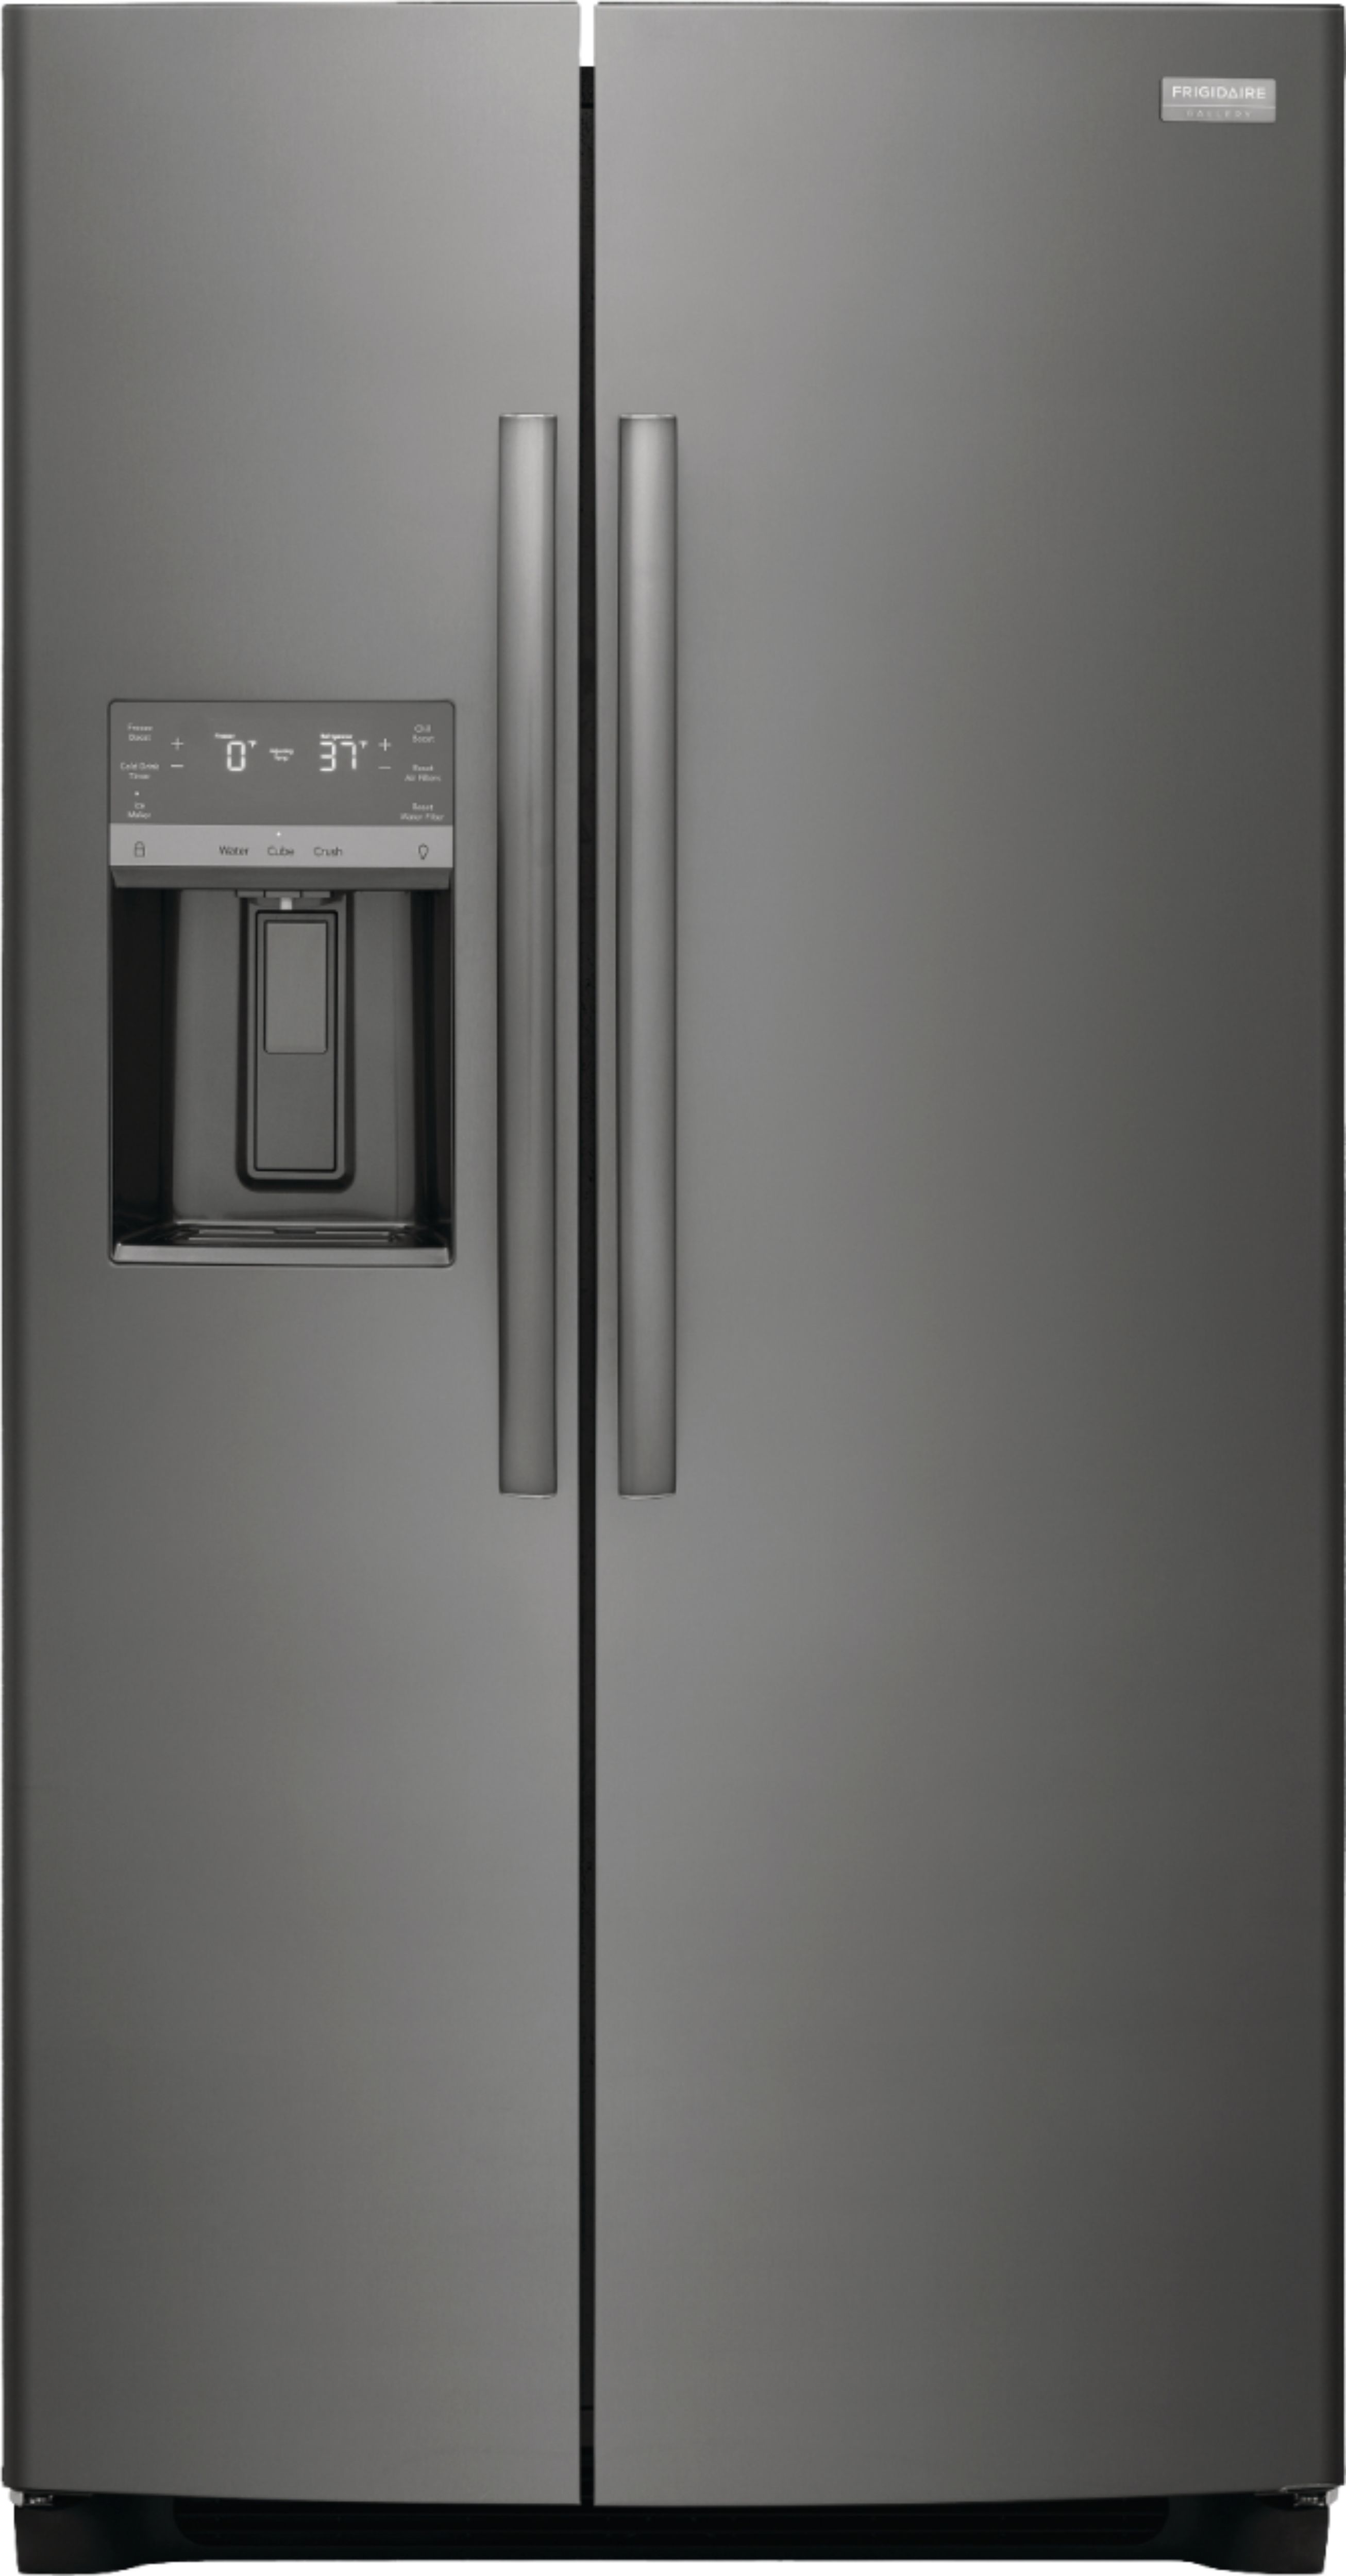 Frigidaire - Gallery 22.3 Cu. Ft. Side-by-Side Counter-Depth Refrigerator - Black stainless steel